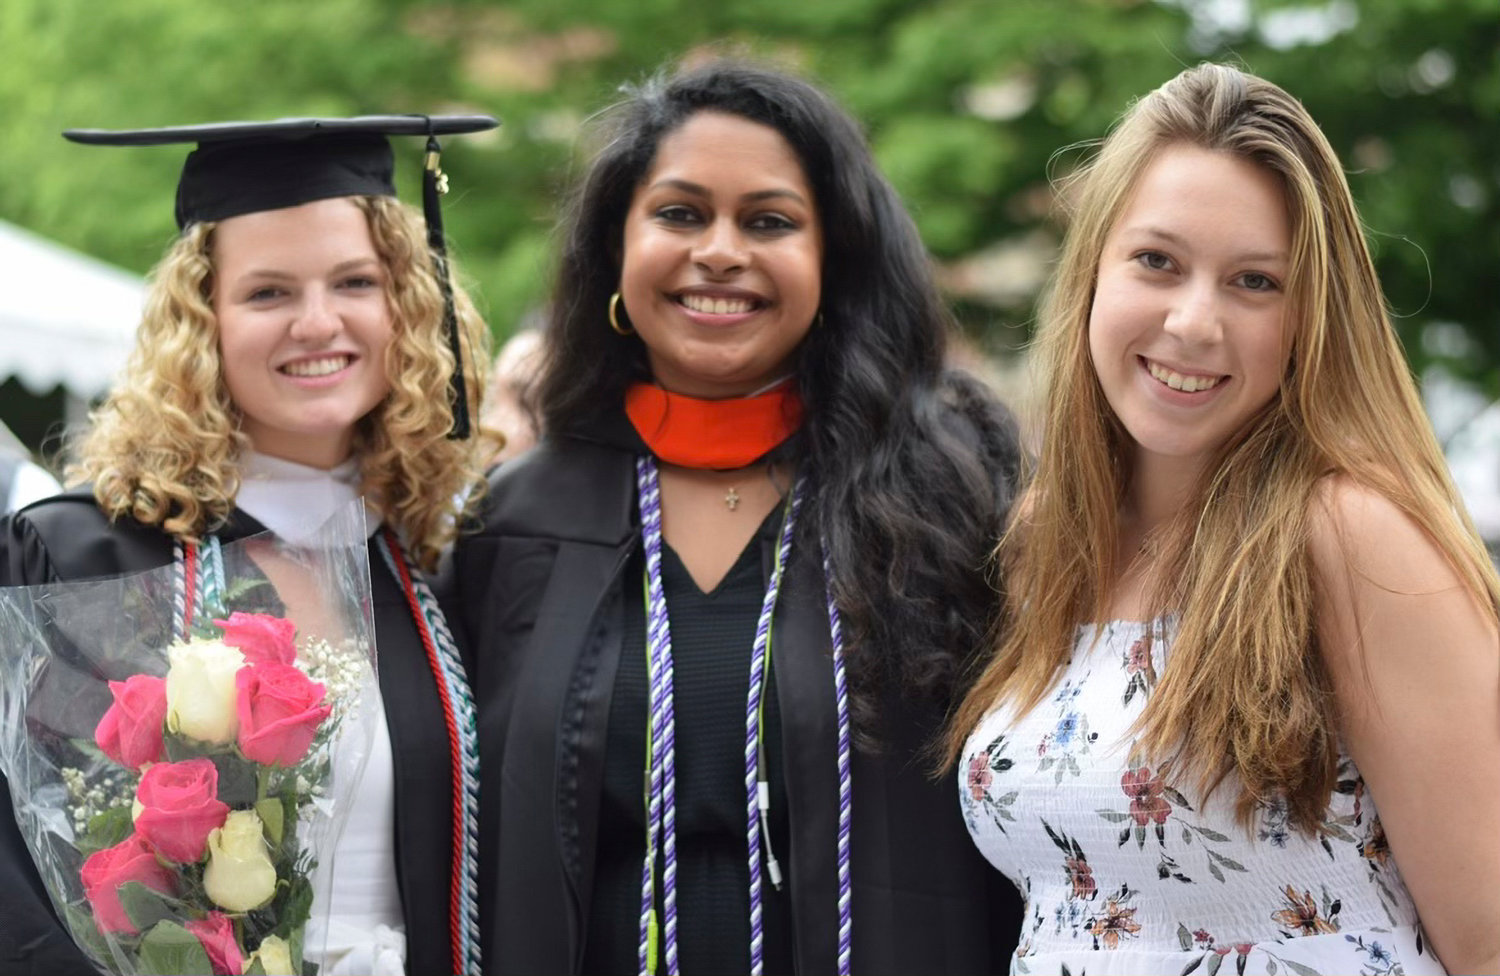 Sydney Waitt, far right, is one of a number of students with concerns about traveling to the Meadowland Exposition Center in New Jersey for Manhattan College’s graduation. Being immuno-compromised, she can’t say she's not worried to share indoor space among people who may not be vaccinated.